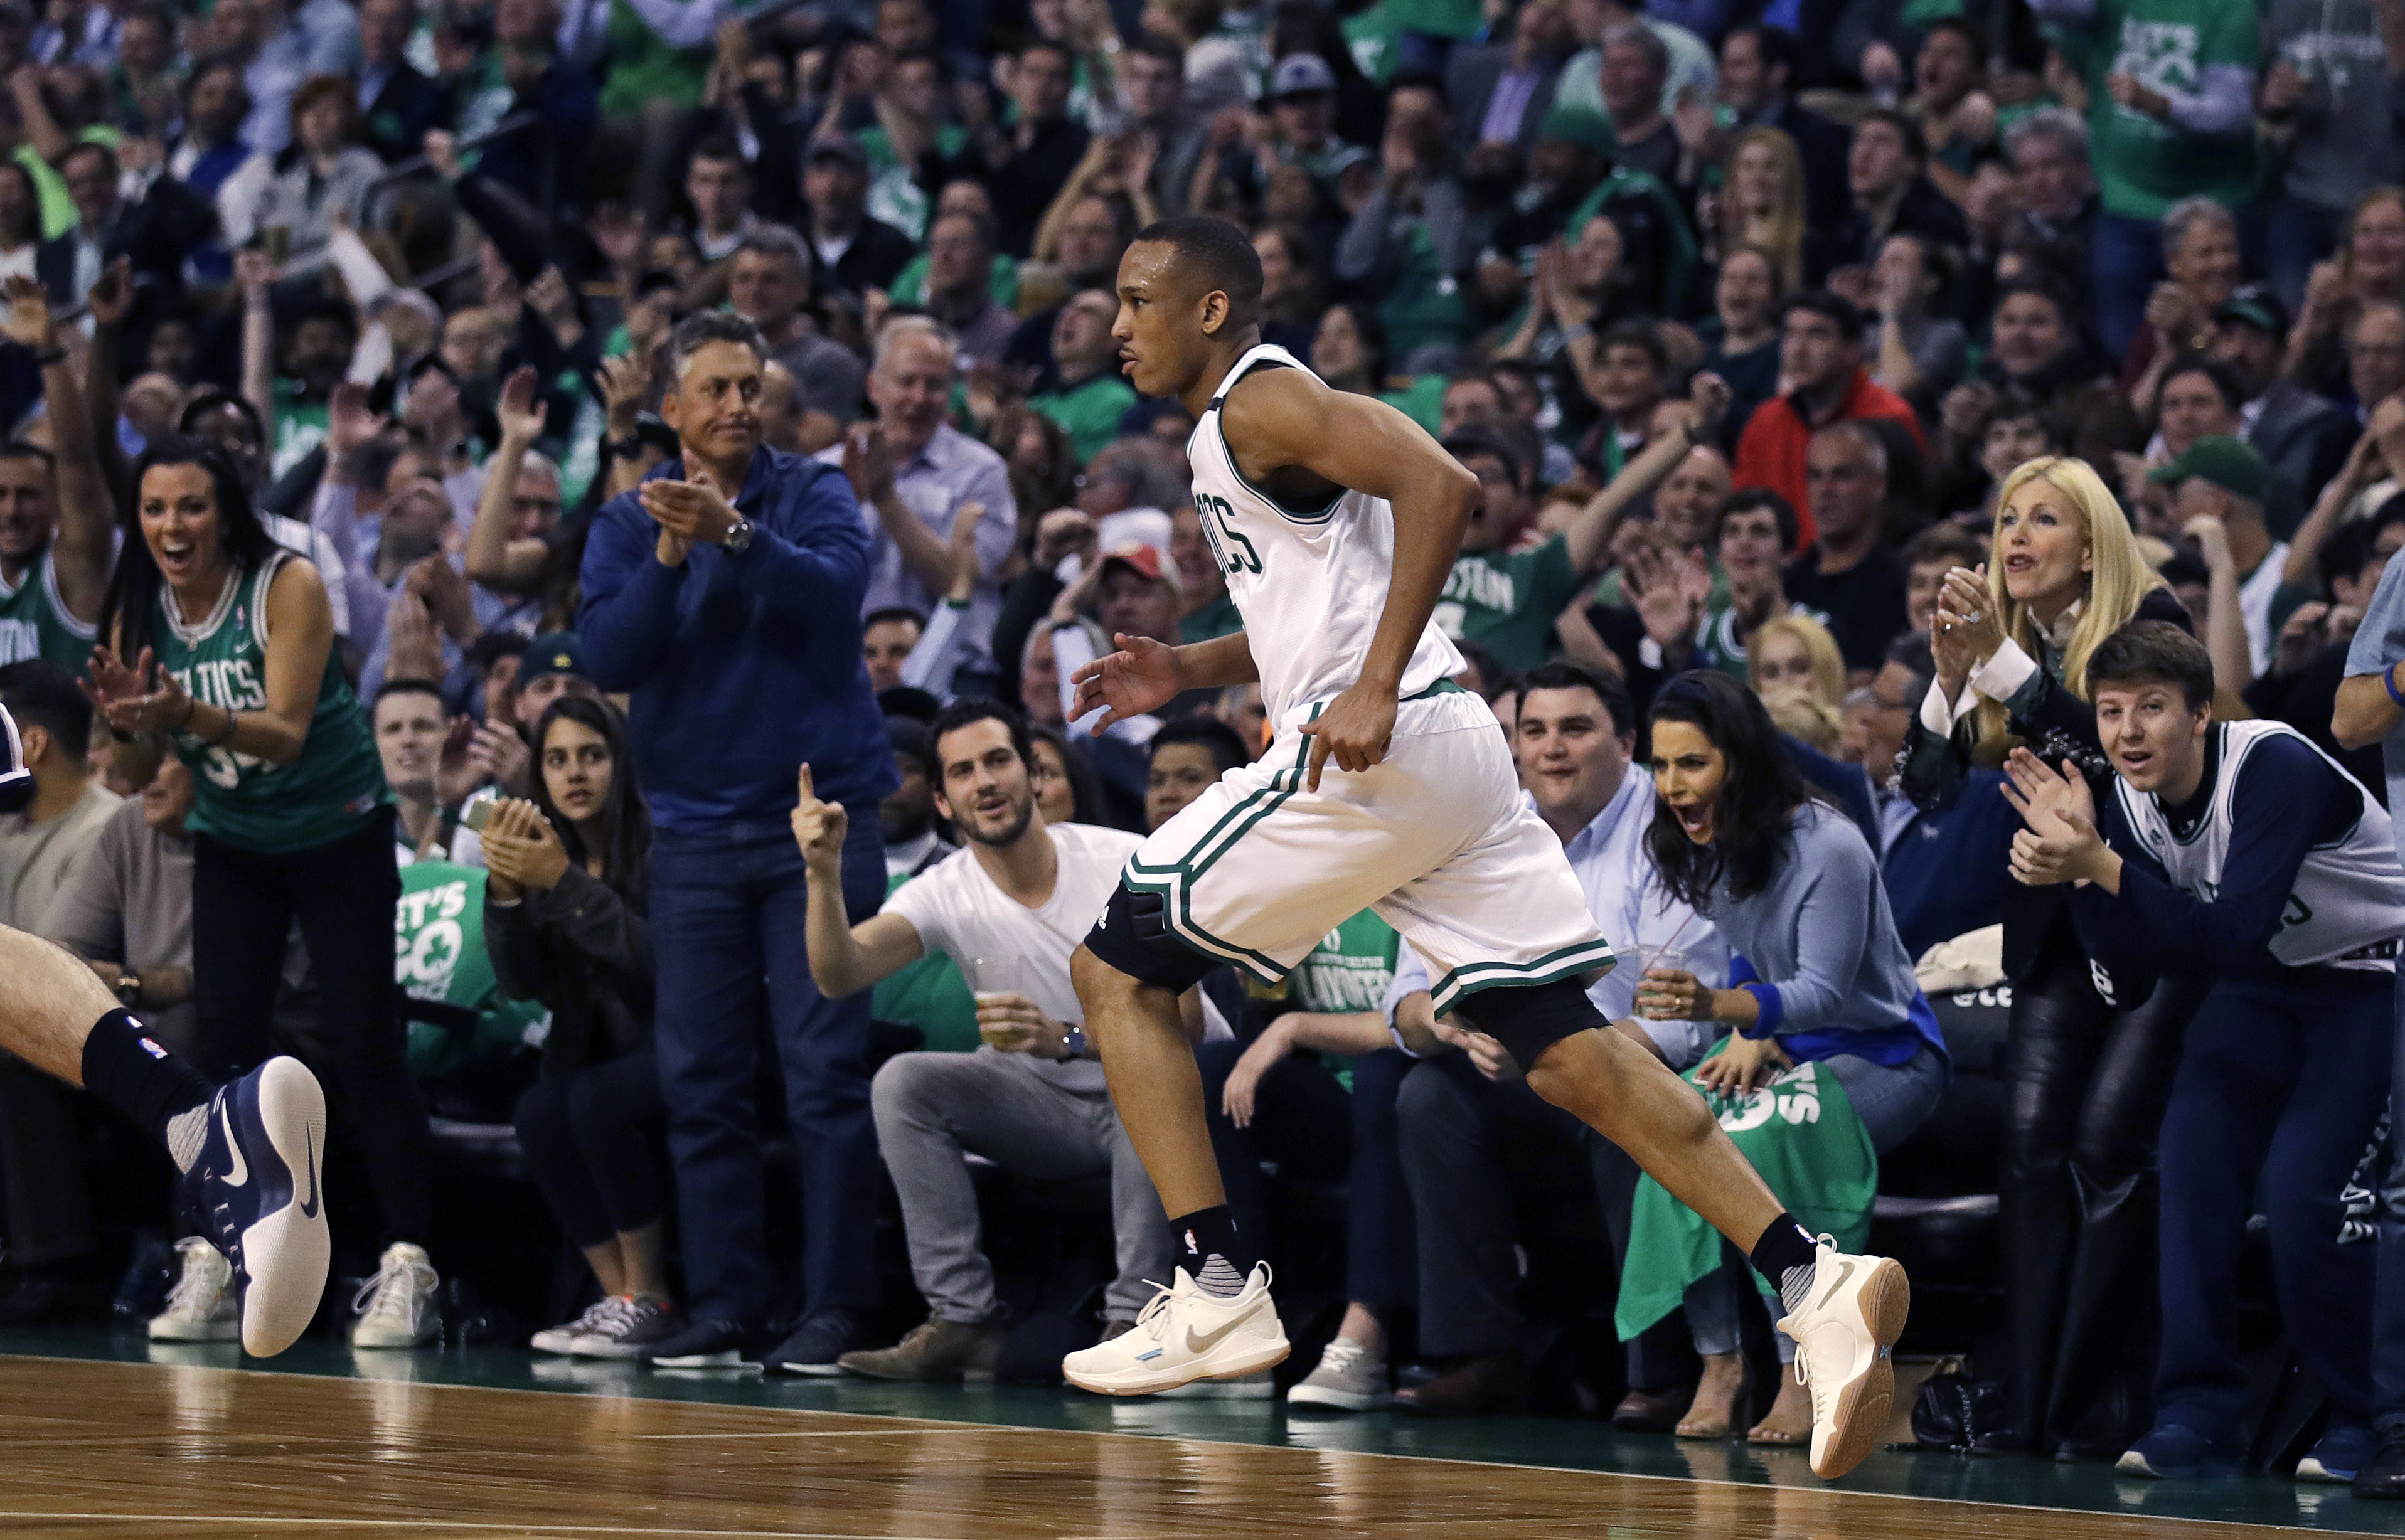 Fans cheer as Boston Celtics guard Avery Bradley heads down court after hitting a 3-pointer during the second quarter of Game 5 of an NBA basketball second-round playoff series in Boston, Wednesday, May 10, 2017. Bradley scored 29 as the Celtics defeated the Washington Wizards 123-101. (AP Photo/Charles Krupa)